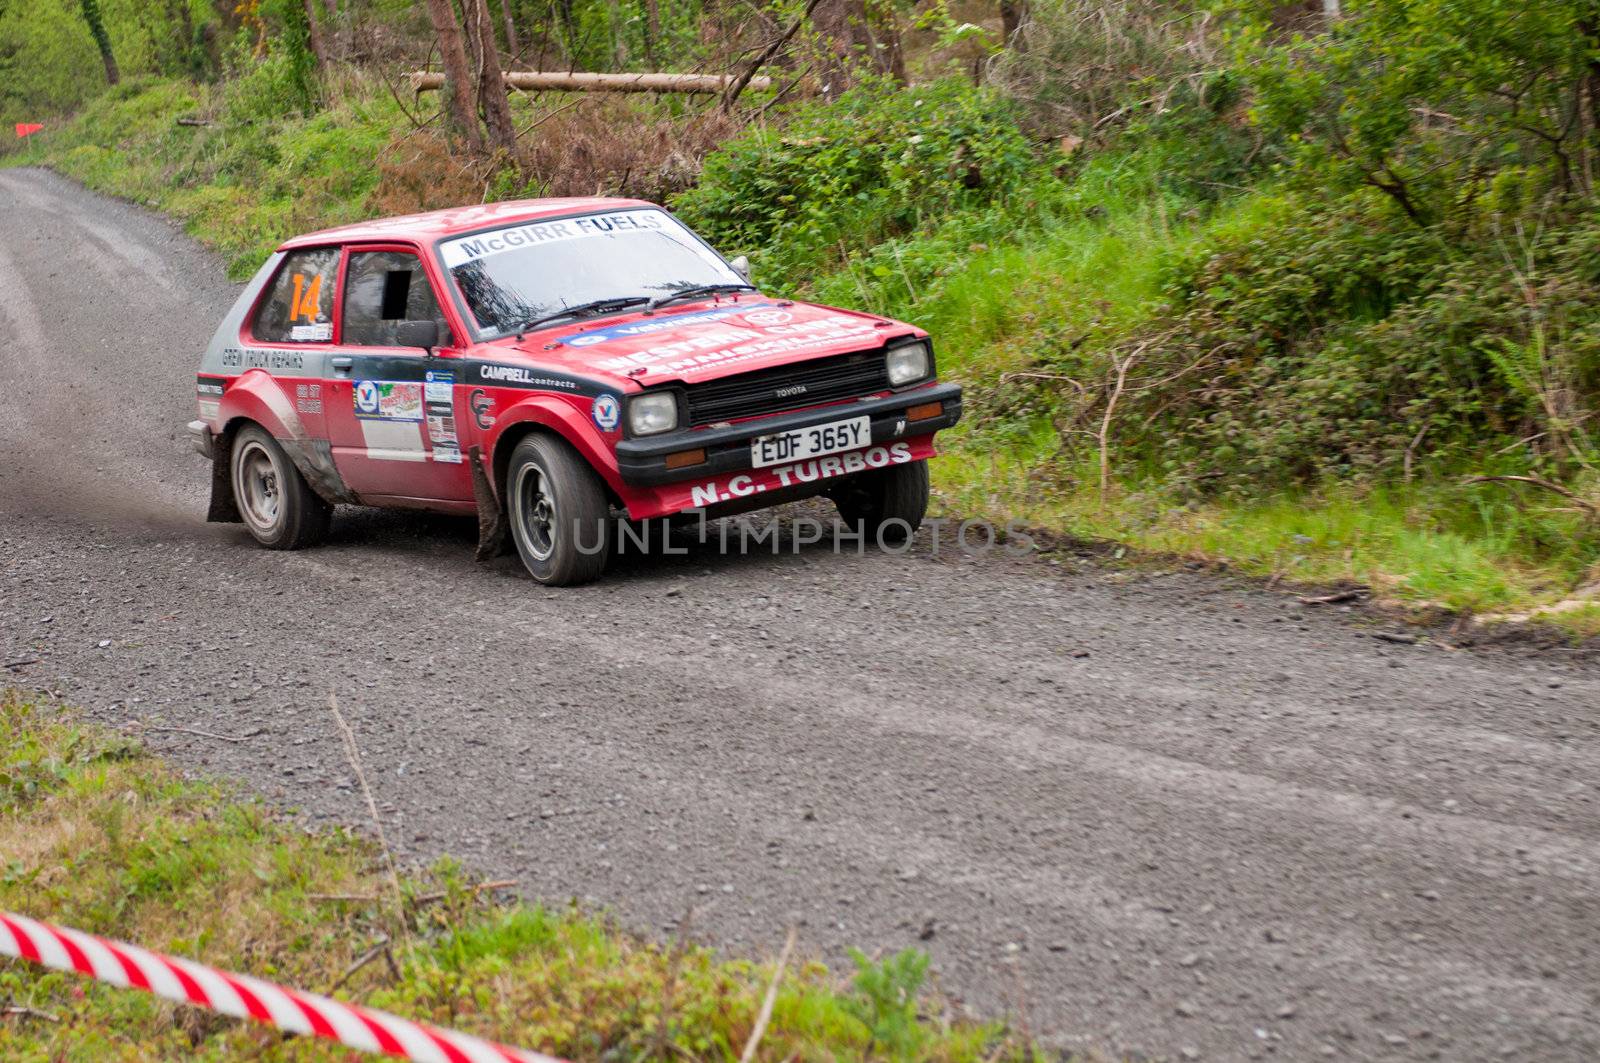 MALLOW, IRELAND - MAY 19: S. Mcgirr driving Toyota Starlet at the Jim Walsh Cork Forest Rally on May 19, 2012 in Mallow, Ireland. 4th round of the Valvoline National Forest Rally Championship.